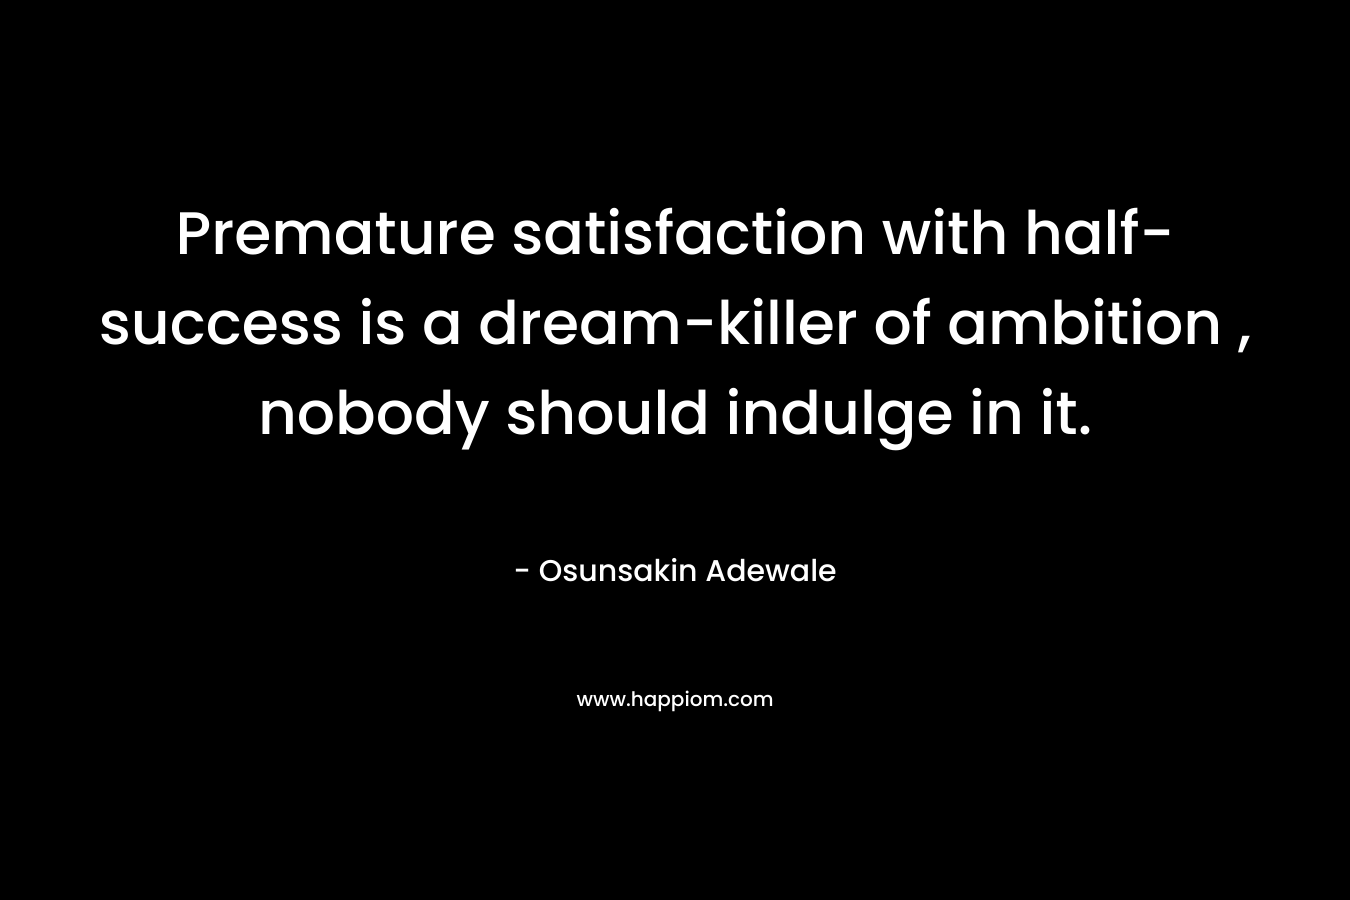 Premature satisfaction with half-success is a dream-killer of ambition , nobody should indulge in it.